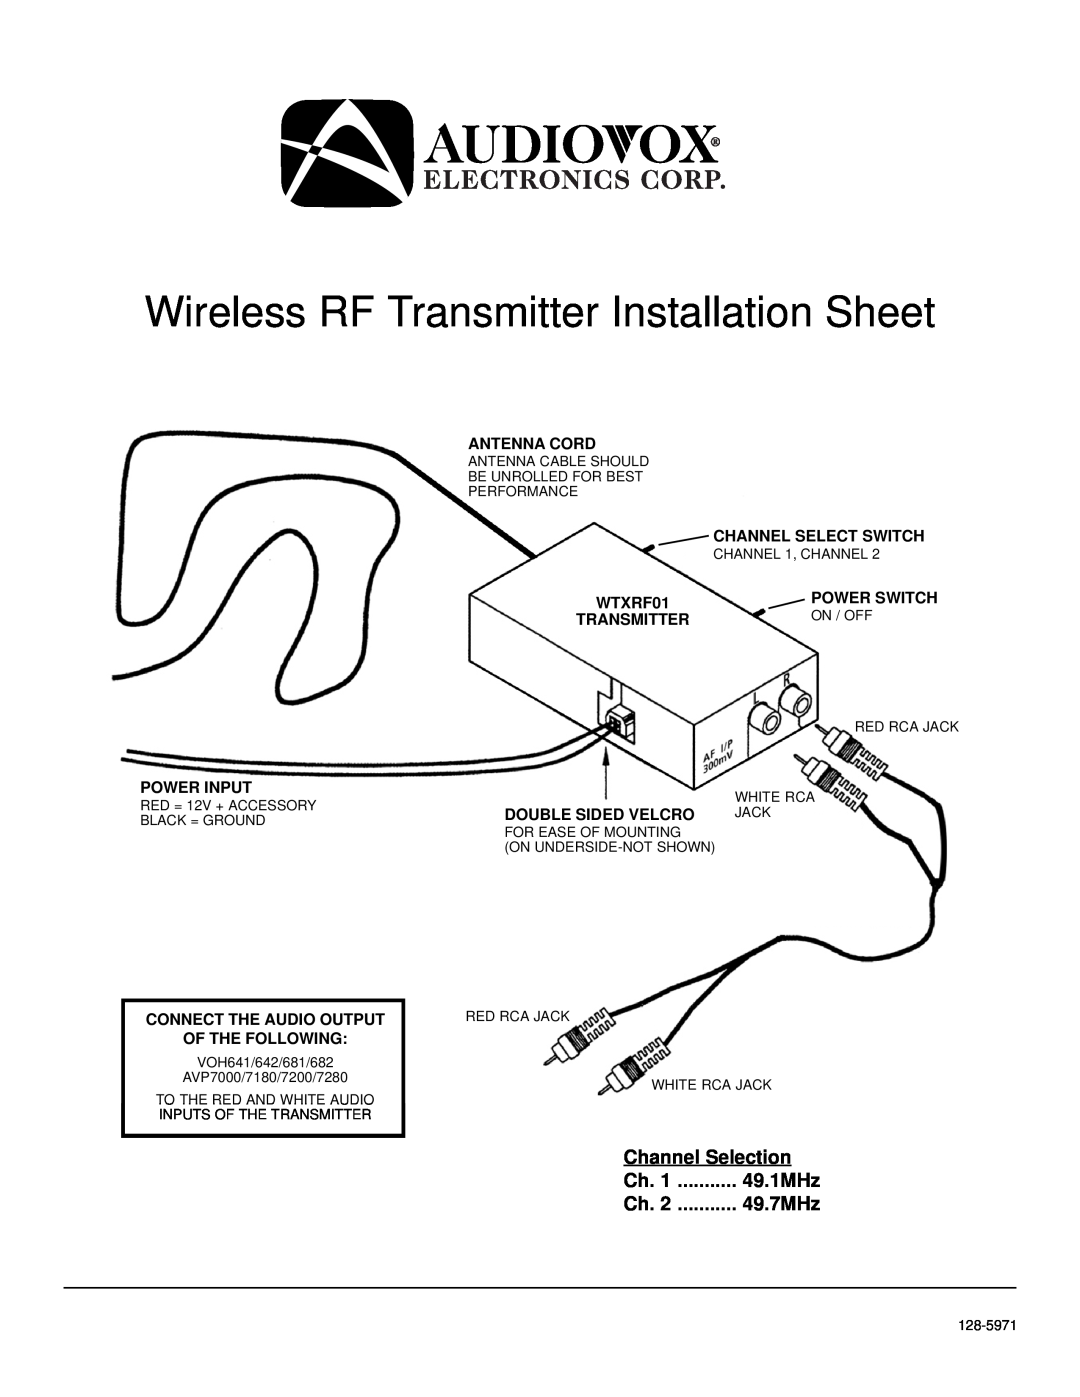 Audiovox 128-5971 manual Wireless RF Transmitter Installation Sheet, Channel Selection, 49.1MHz, 49.7MHz, Power Input 